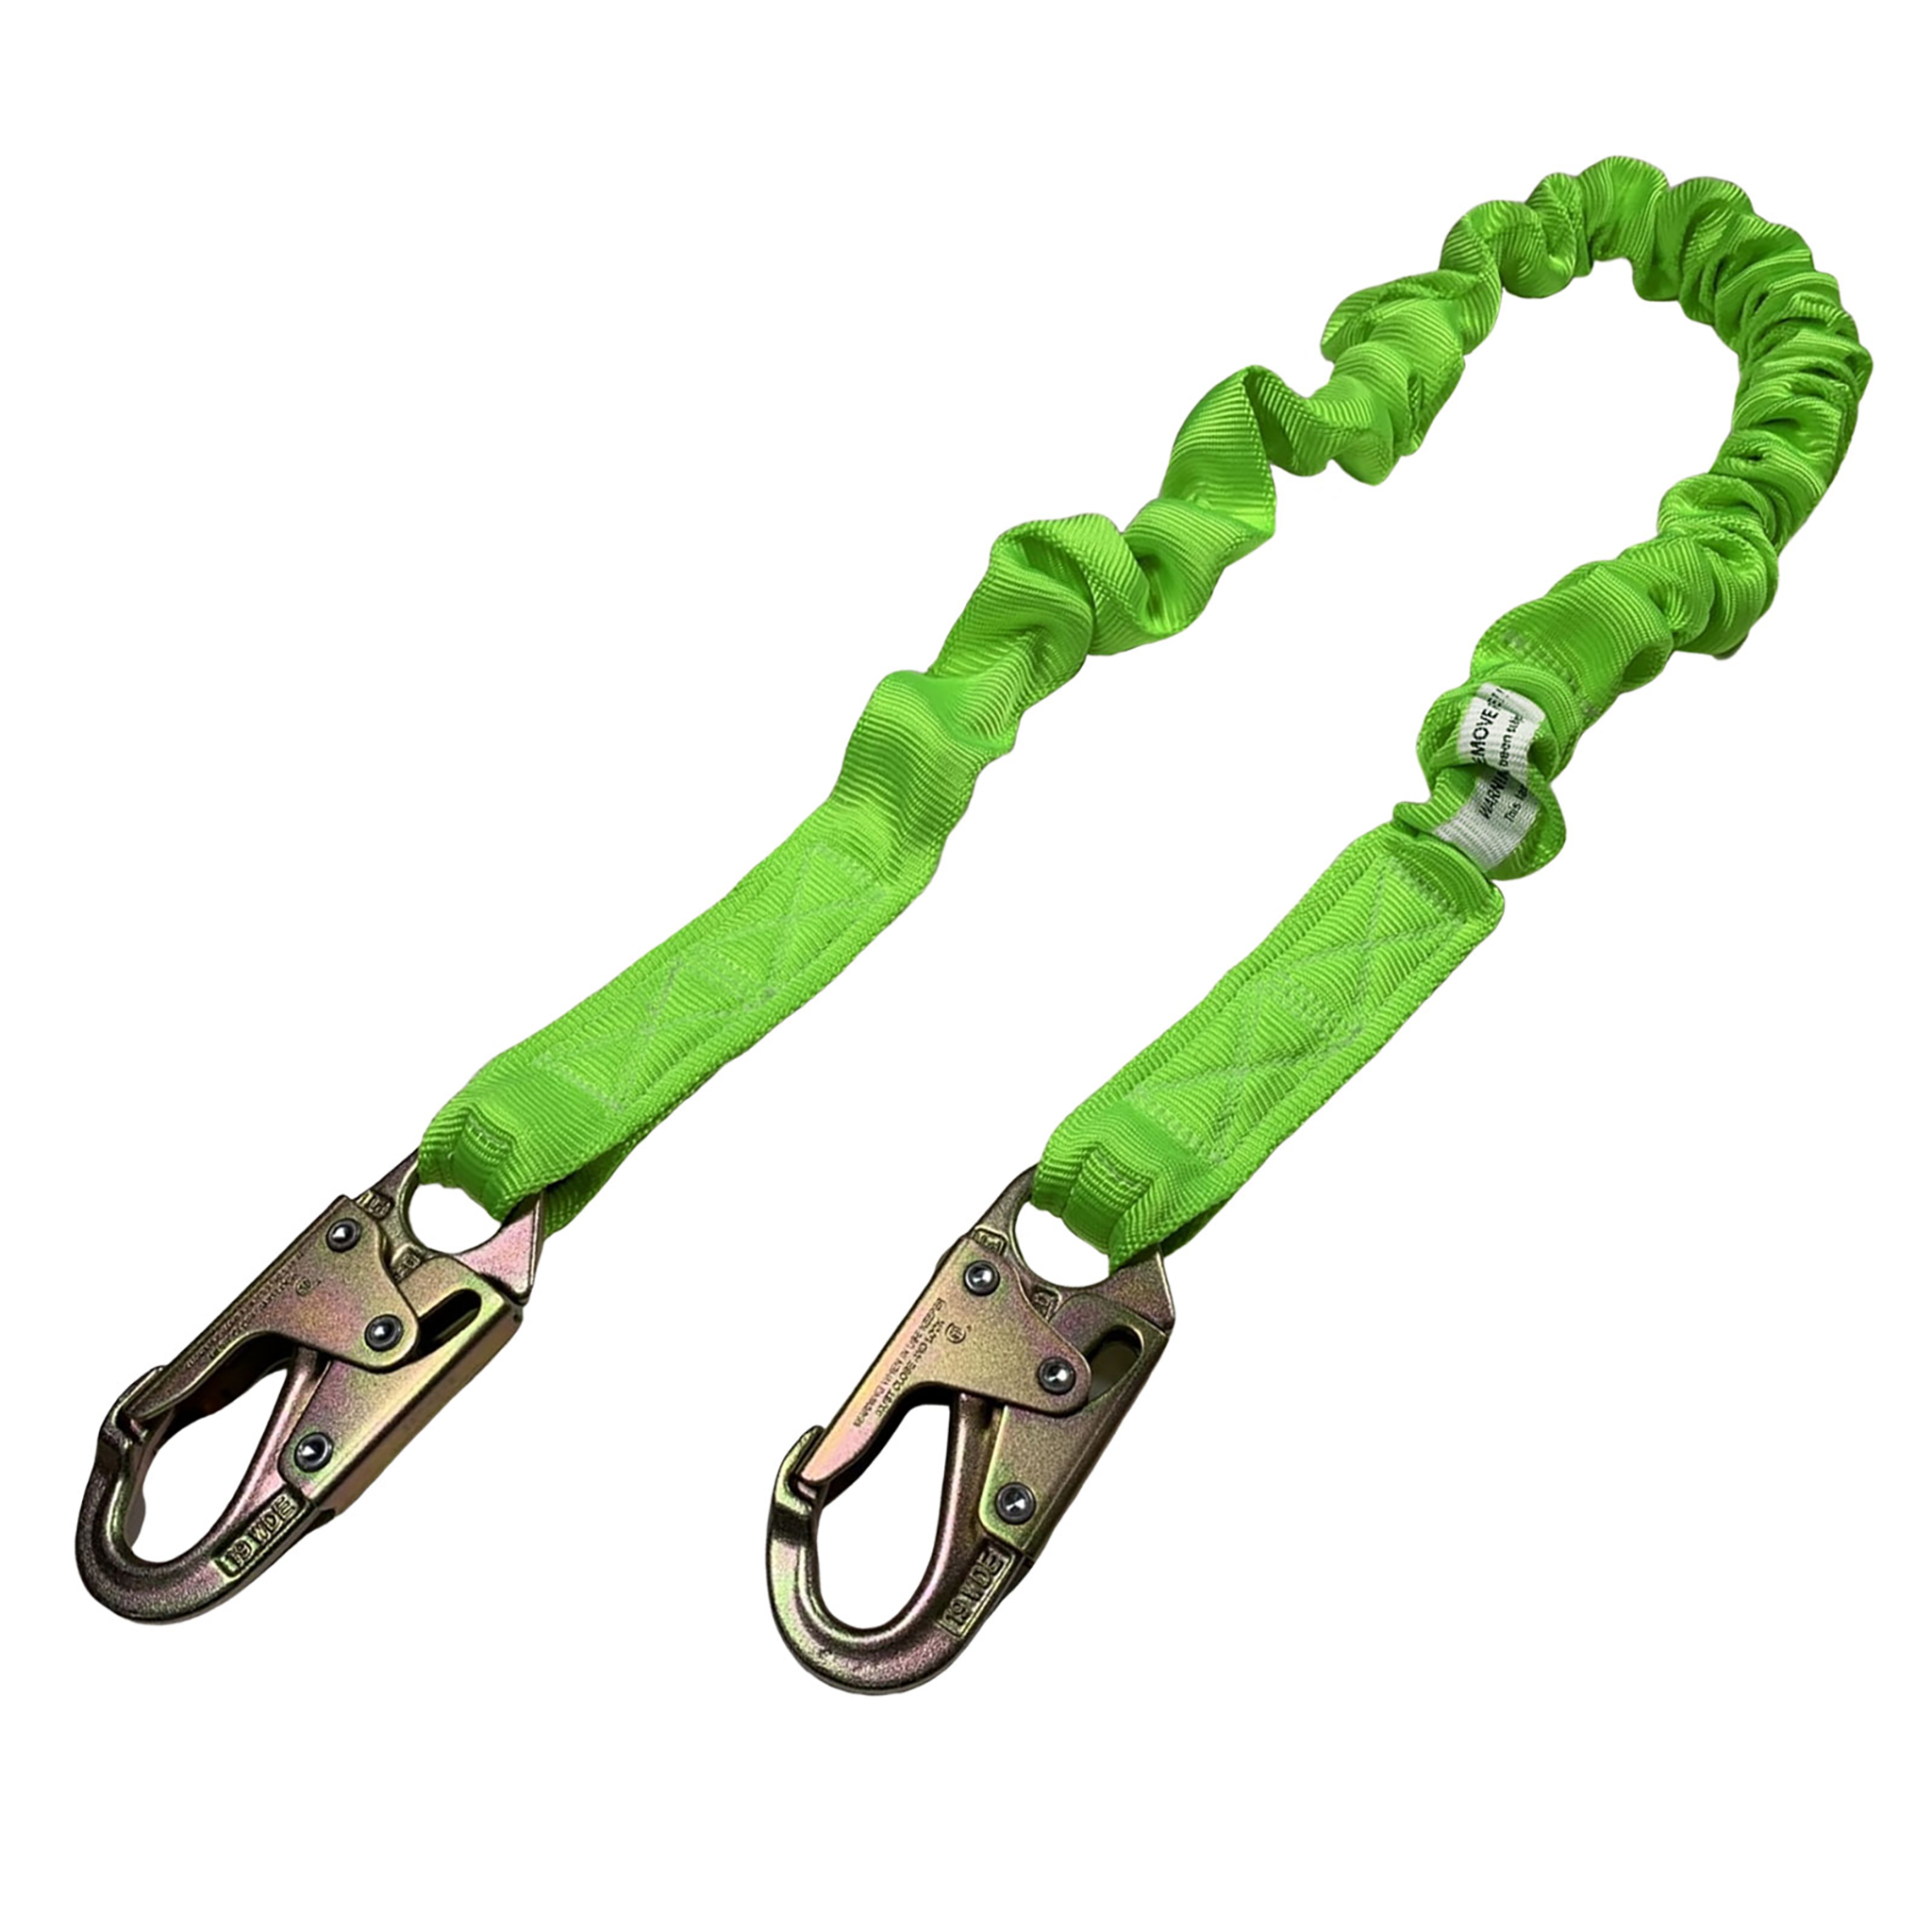 24 in. Chain Positioning Lanyard - Swiveling tower hook at center - Steel  snap hooks at leg ends - High strength corrosion resistant materials - 3M